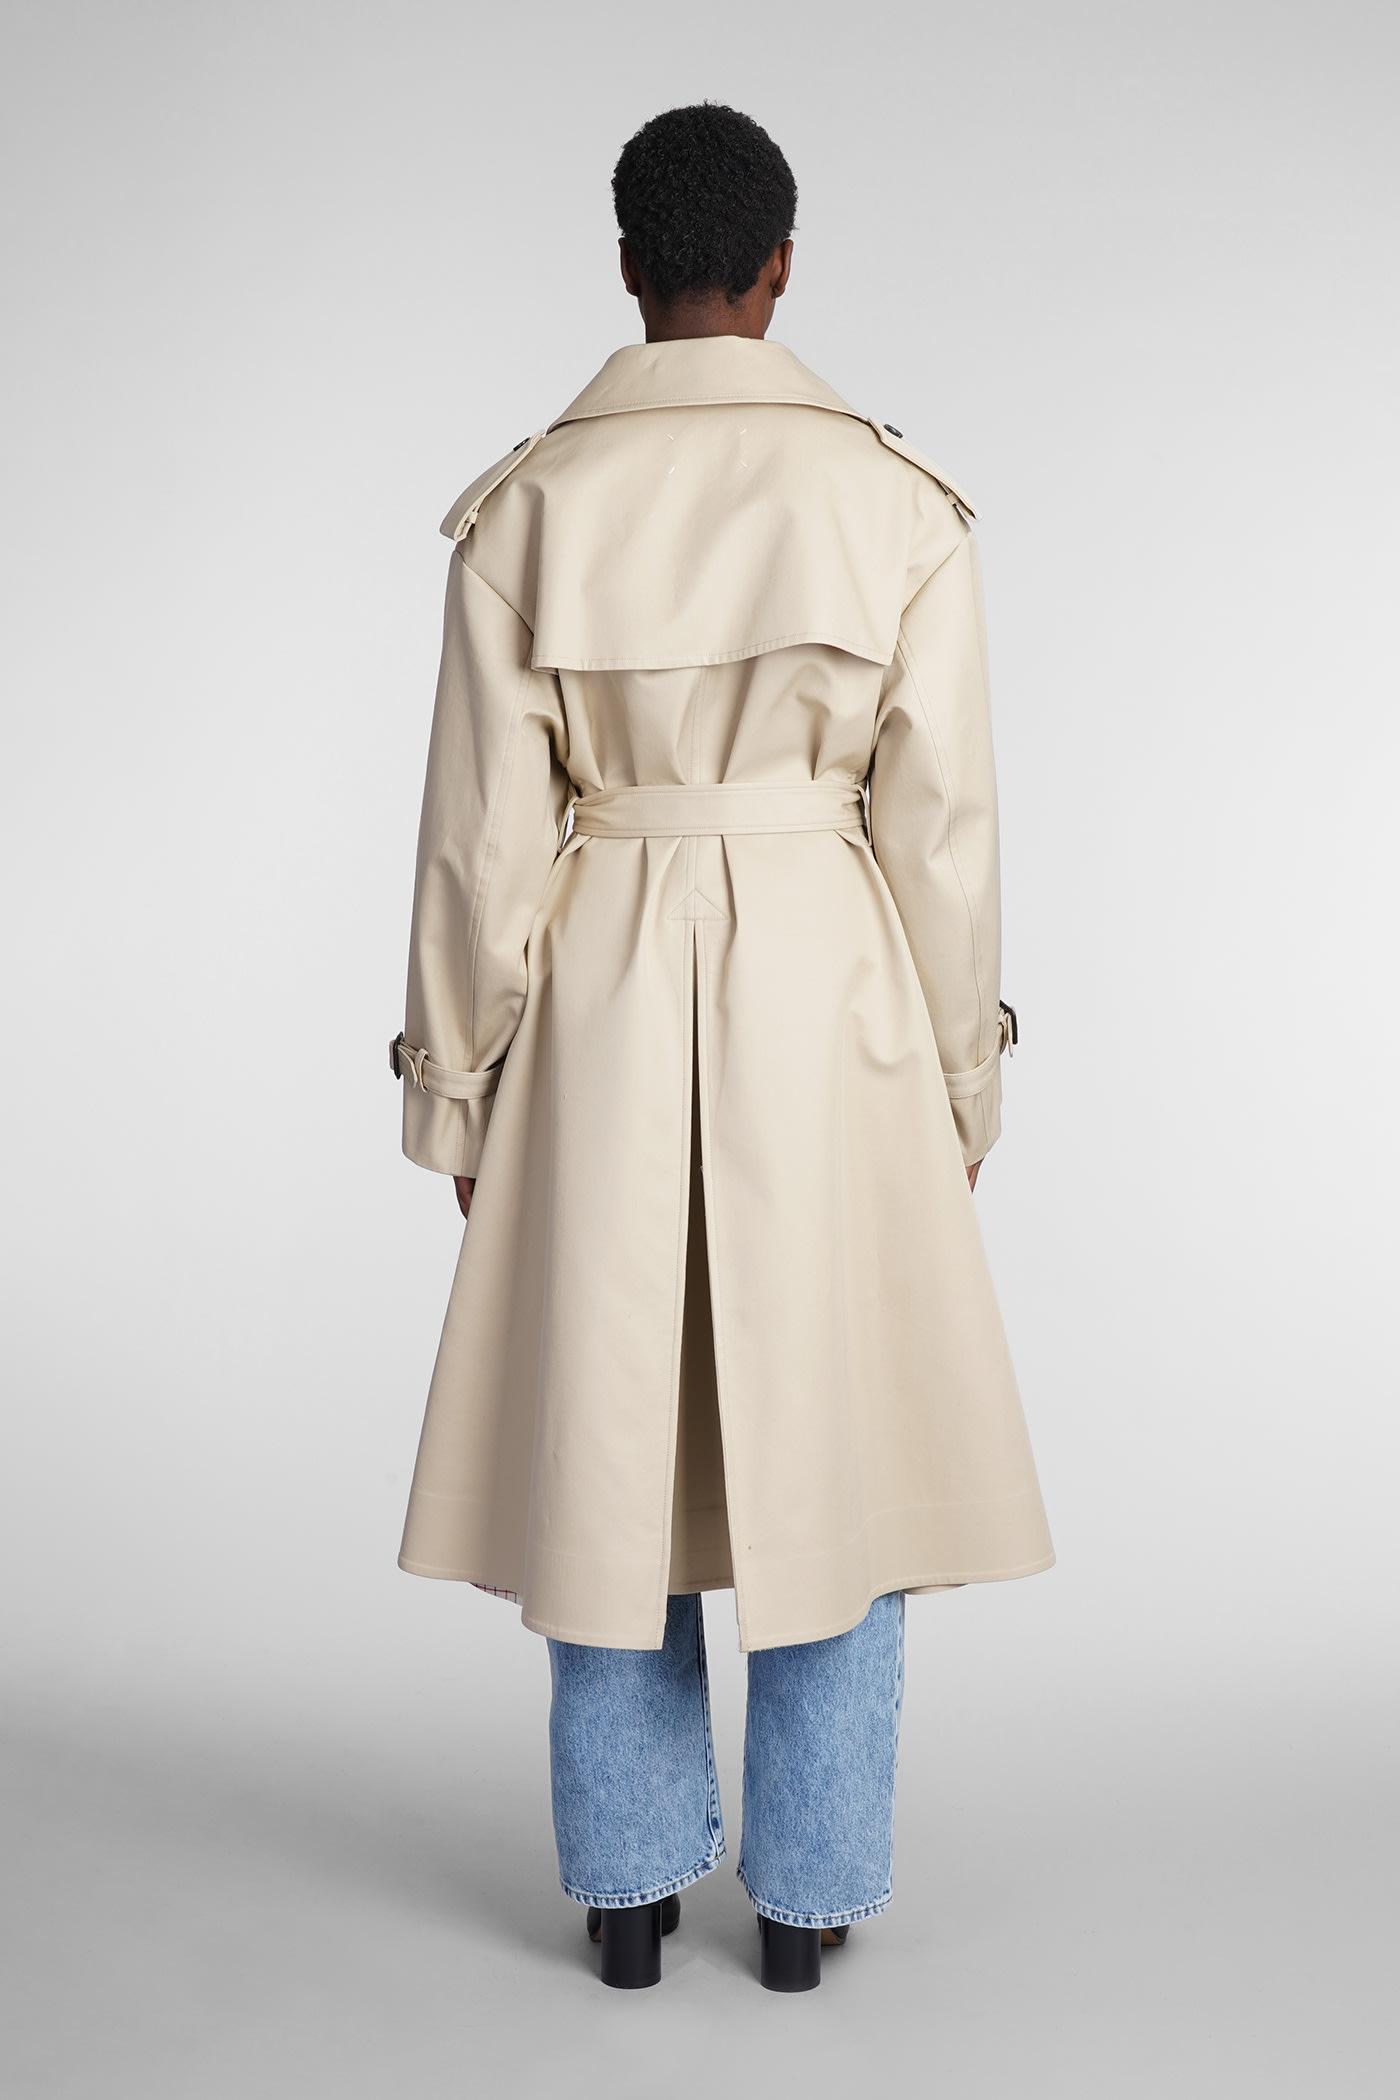 Natural Maison Margiela Cotton Reversible Trench Coat in Beige Womens Clothing Coats Long coats and winter coats 